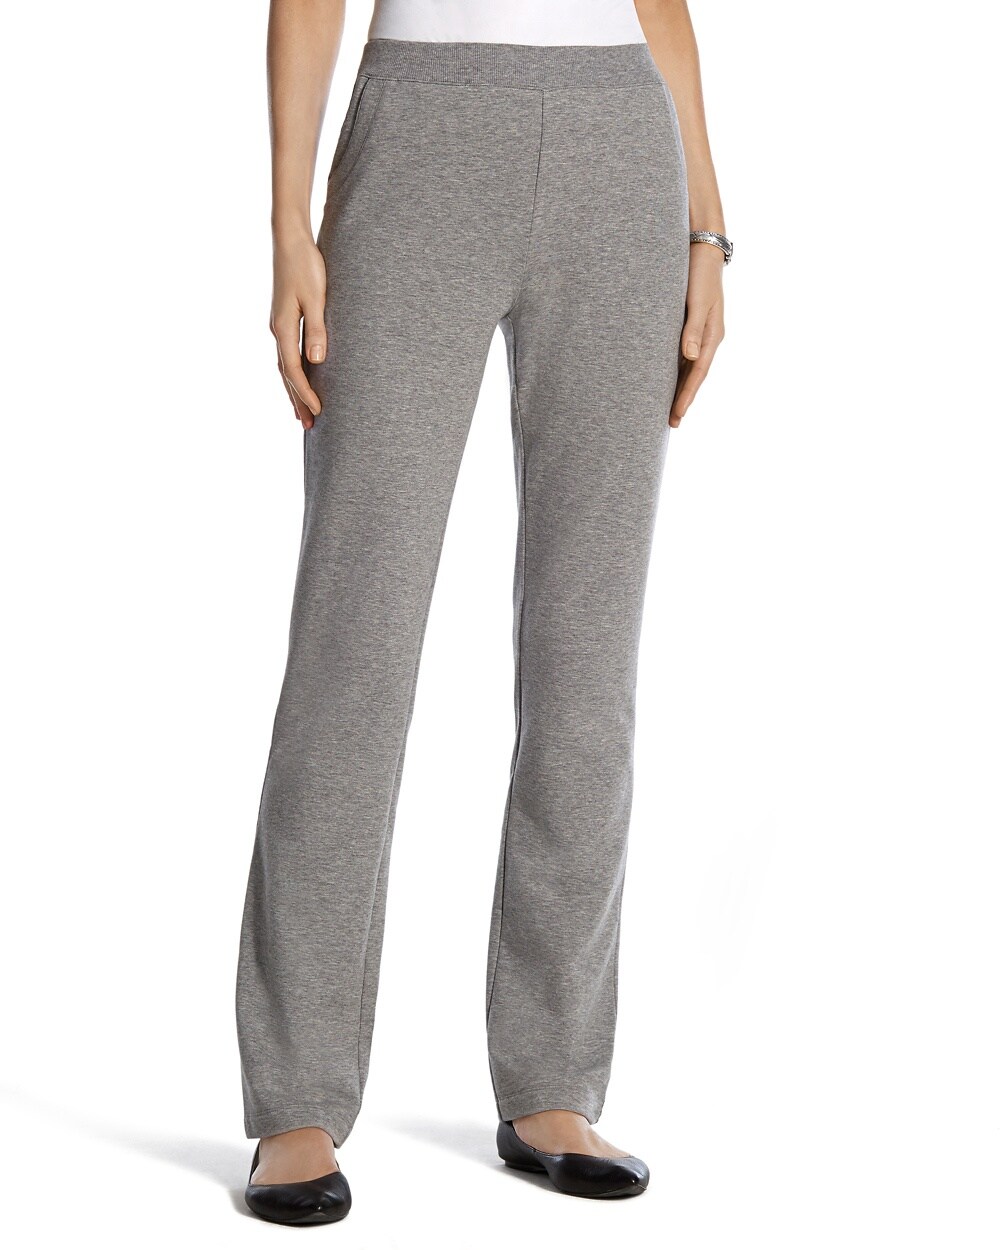 Zenergy Knit Collection Pants in Gray